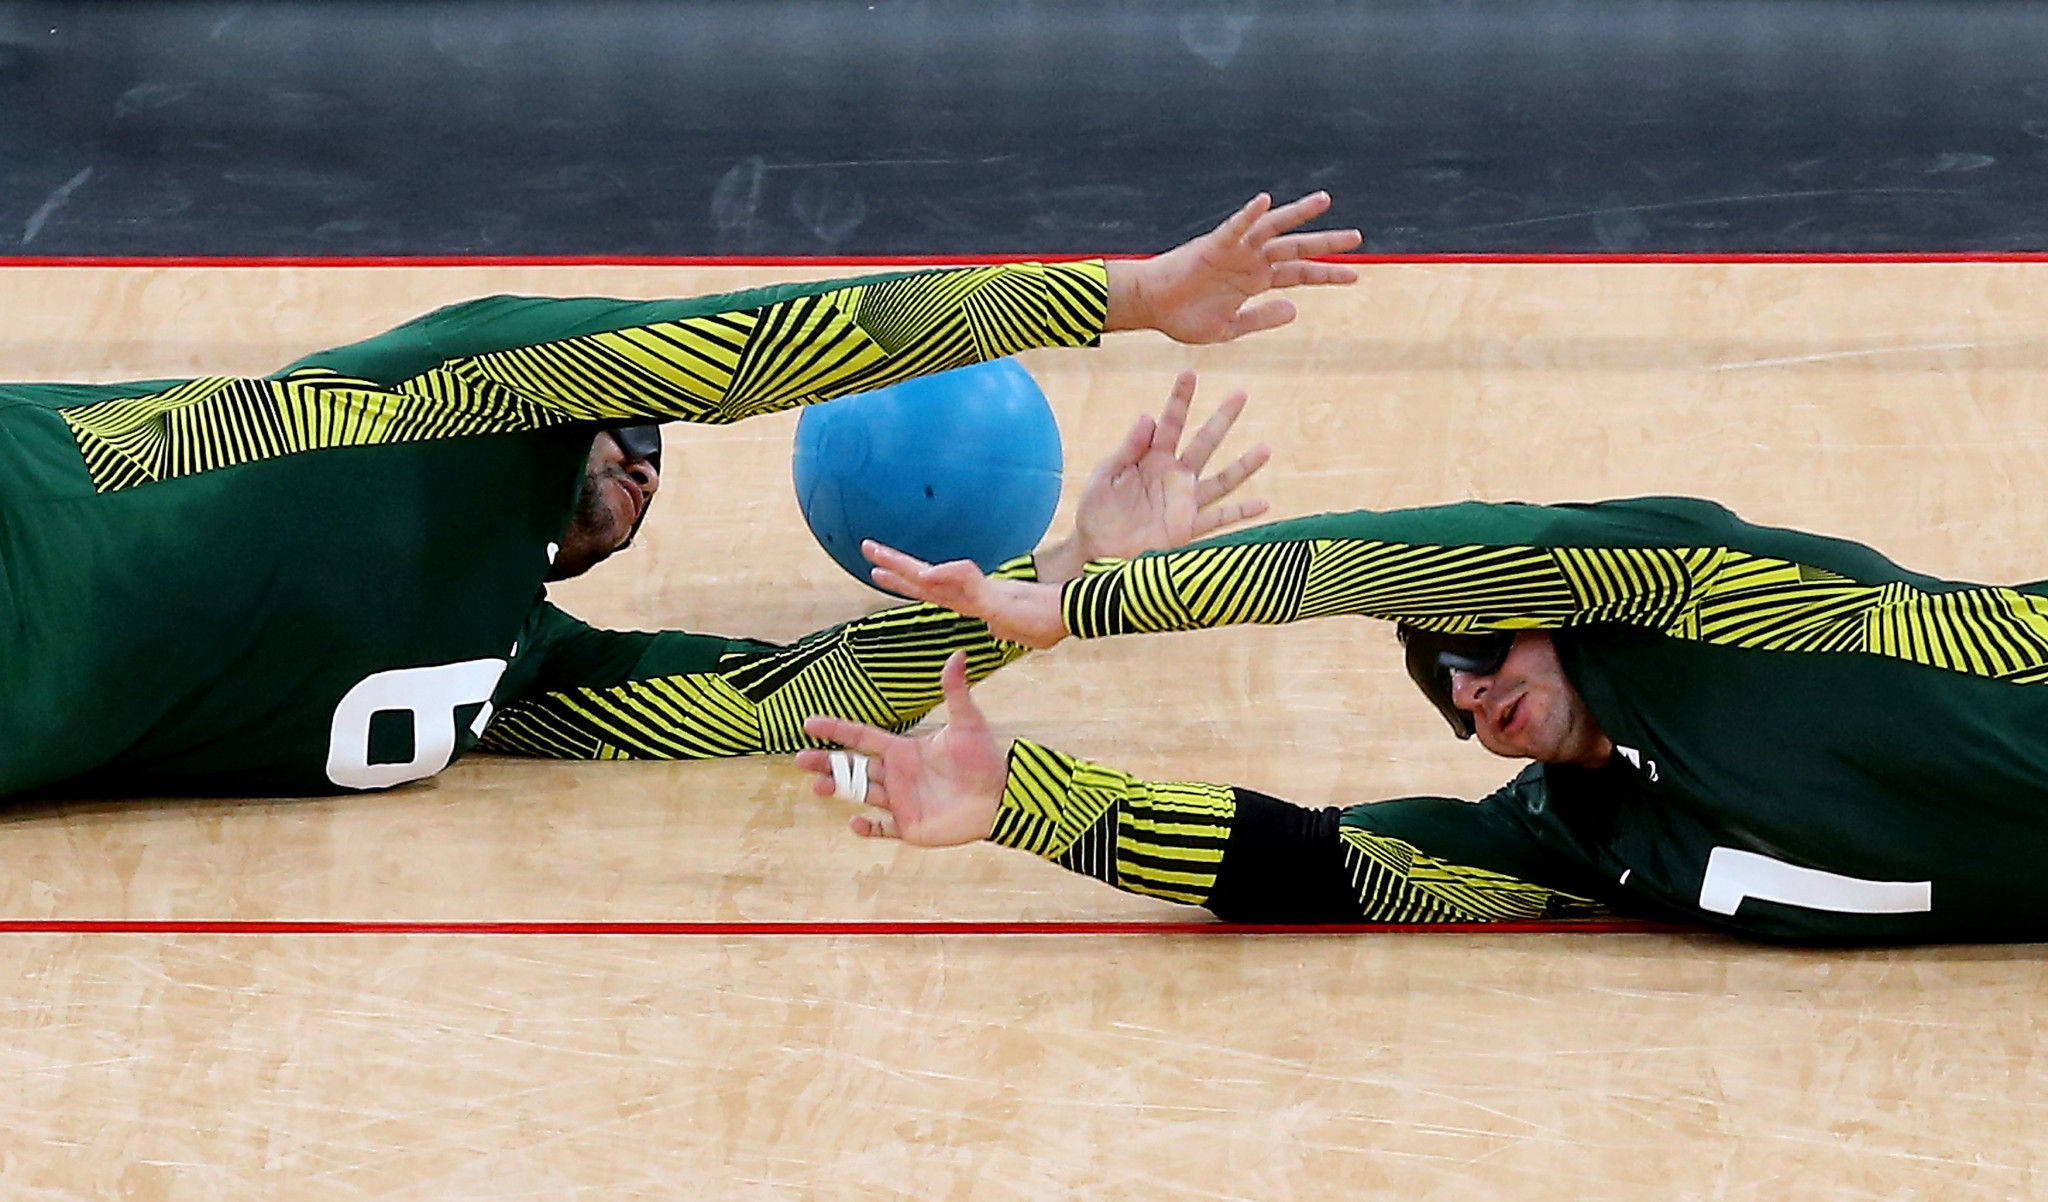 Cape Coast in Ghana has been named as the host of the 2021 African Goalball Championships ©Getty Images